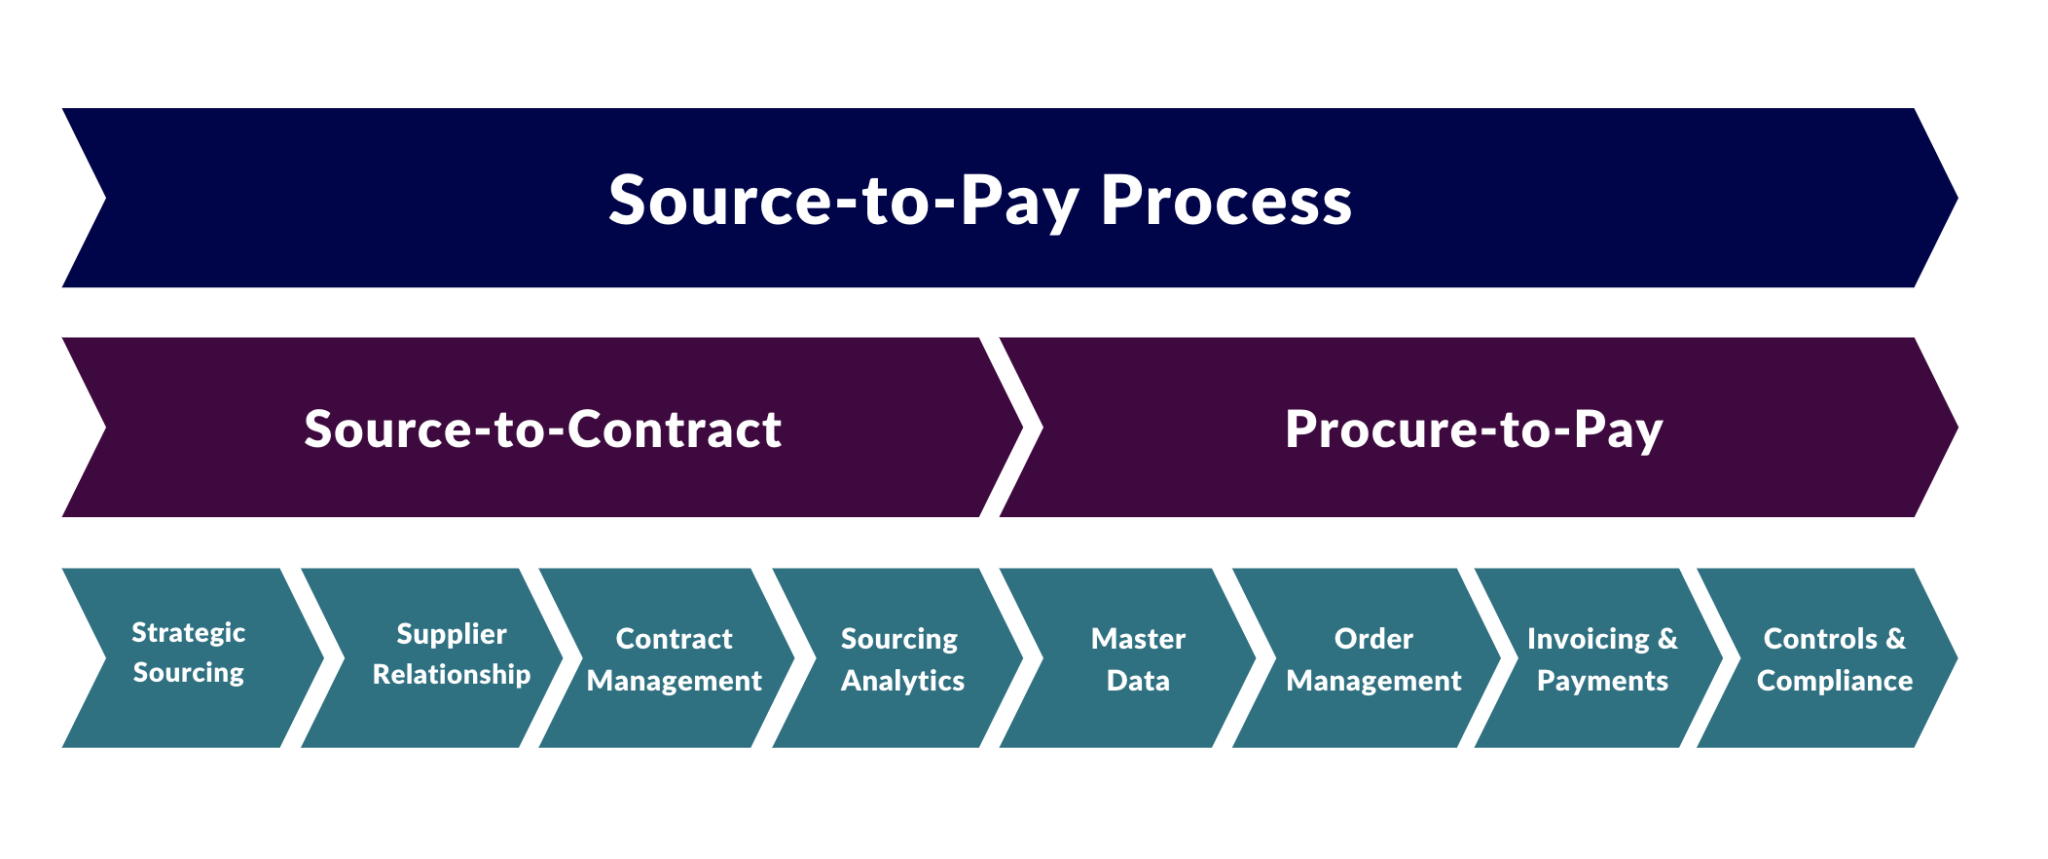 Second pay. Source to pay. Source-2-pay. P2p – procure-to-pay. Procurement to pay.